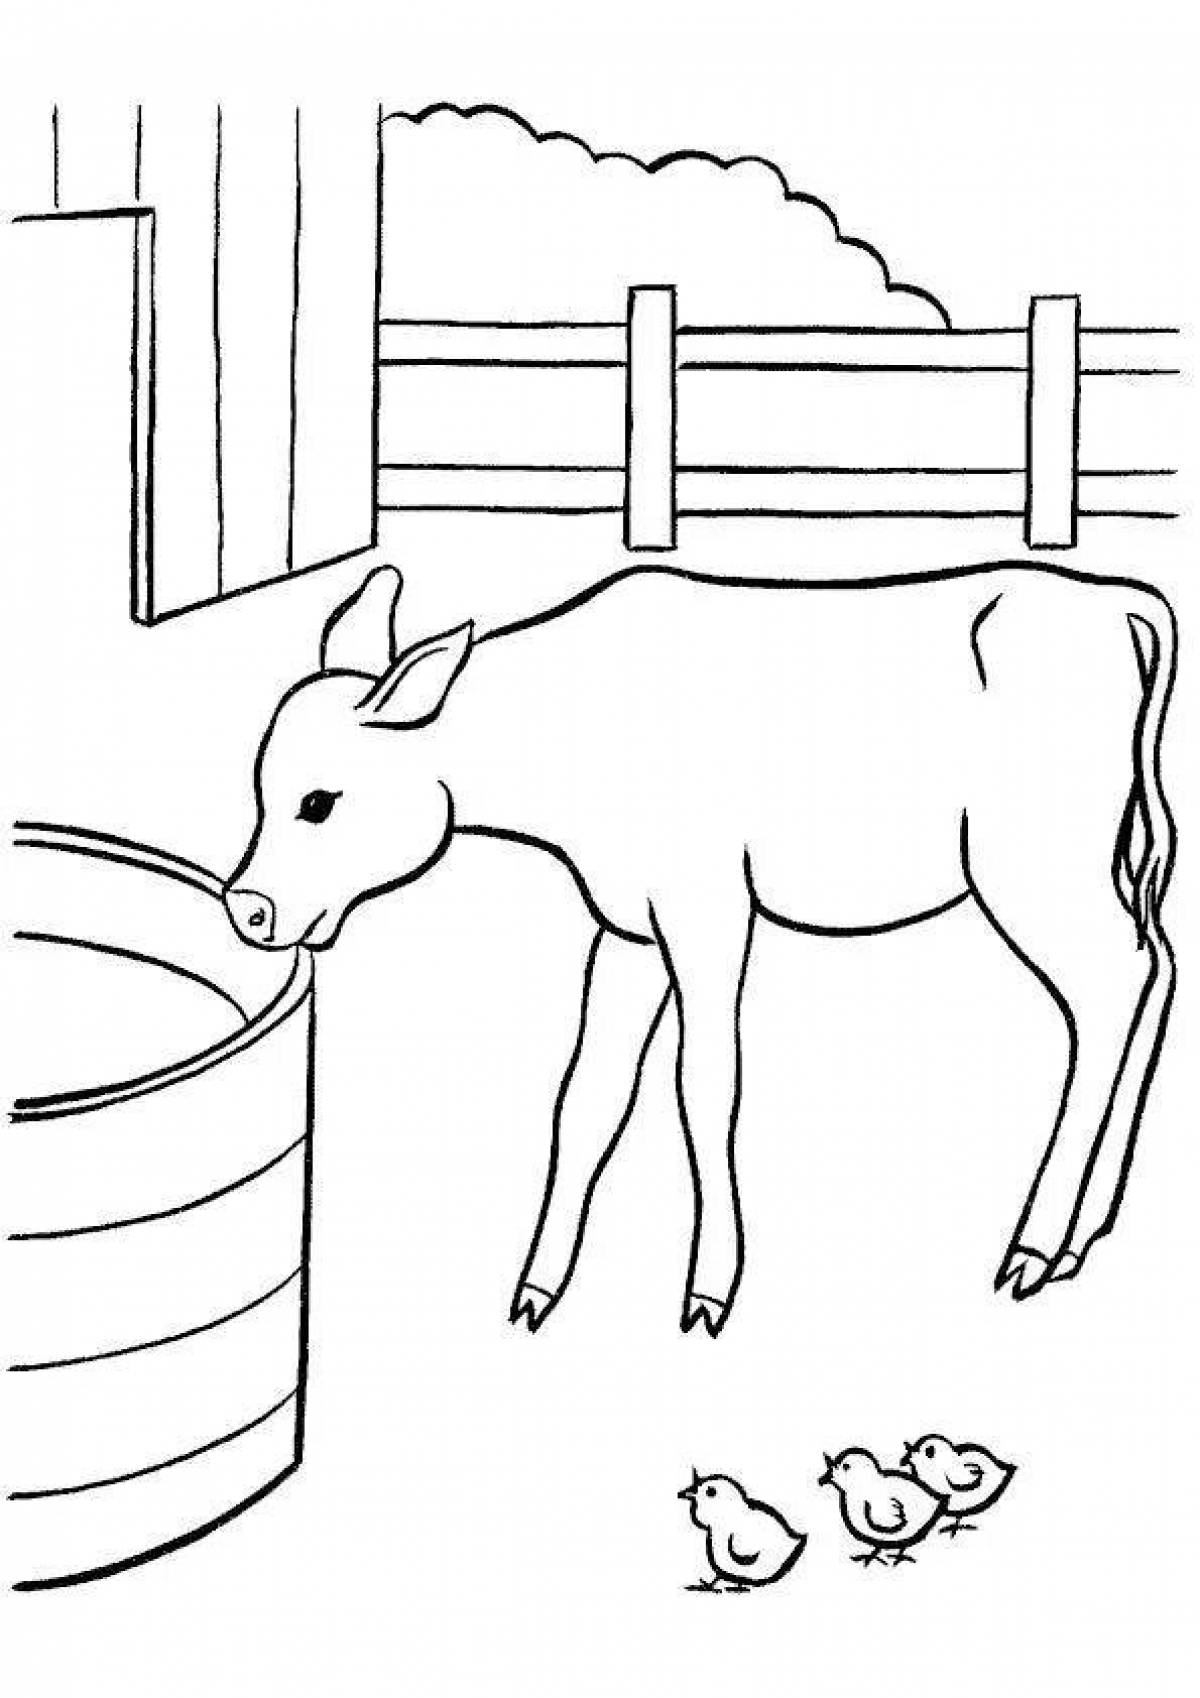 Awesome animal husbandry coloring page